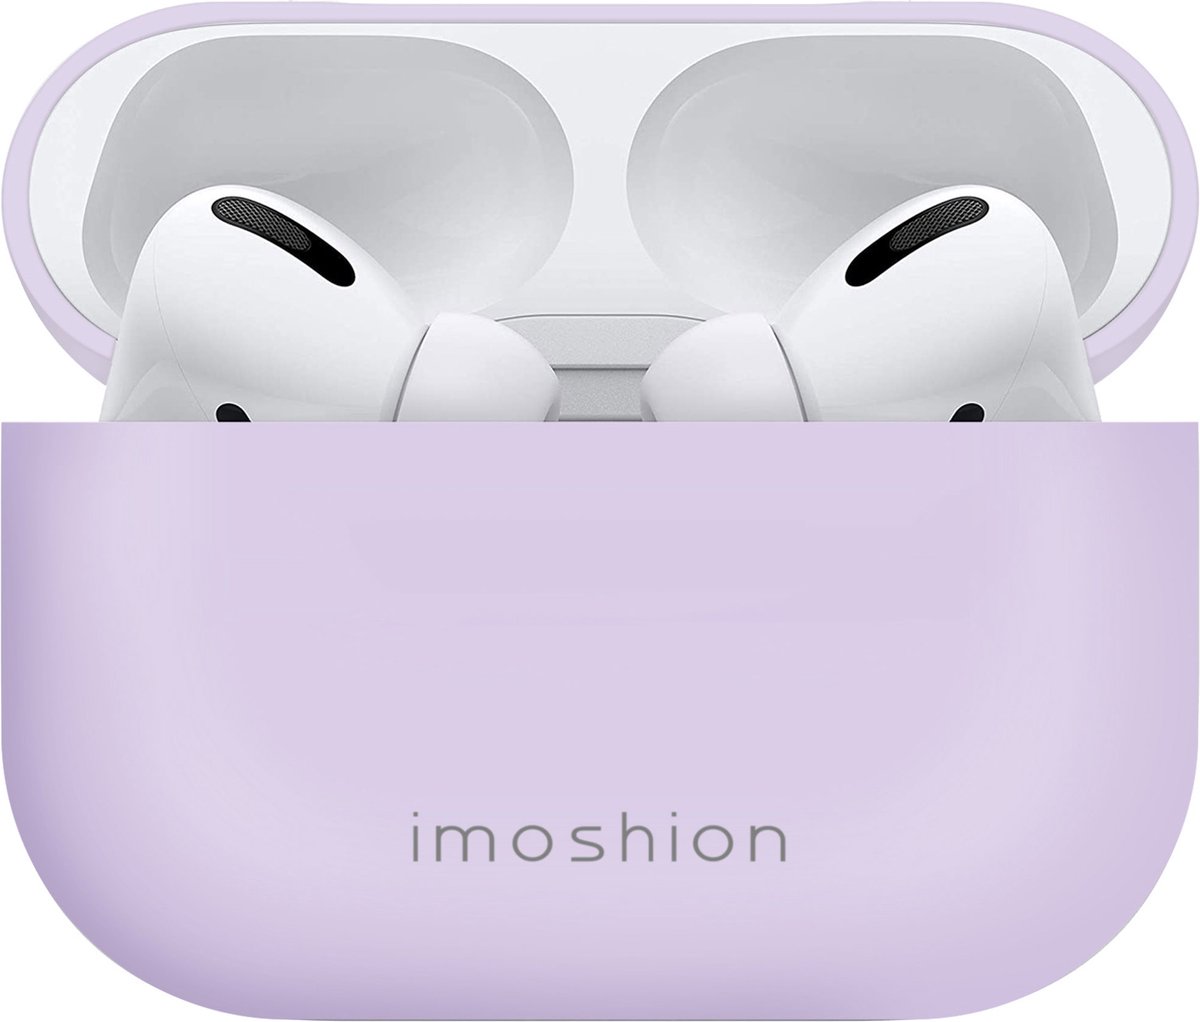 AirPods Pro Hoesje - iMoshion Hardcover Case - Lila